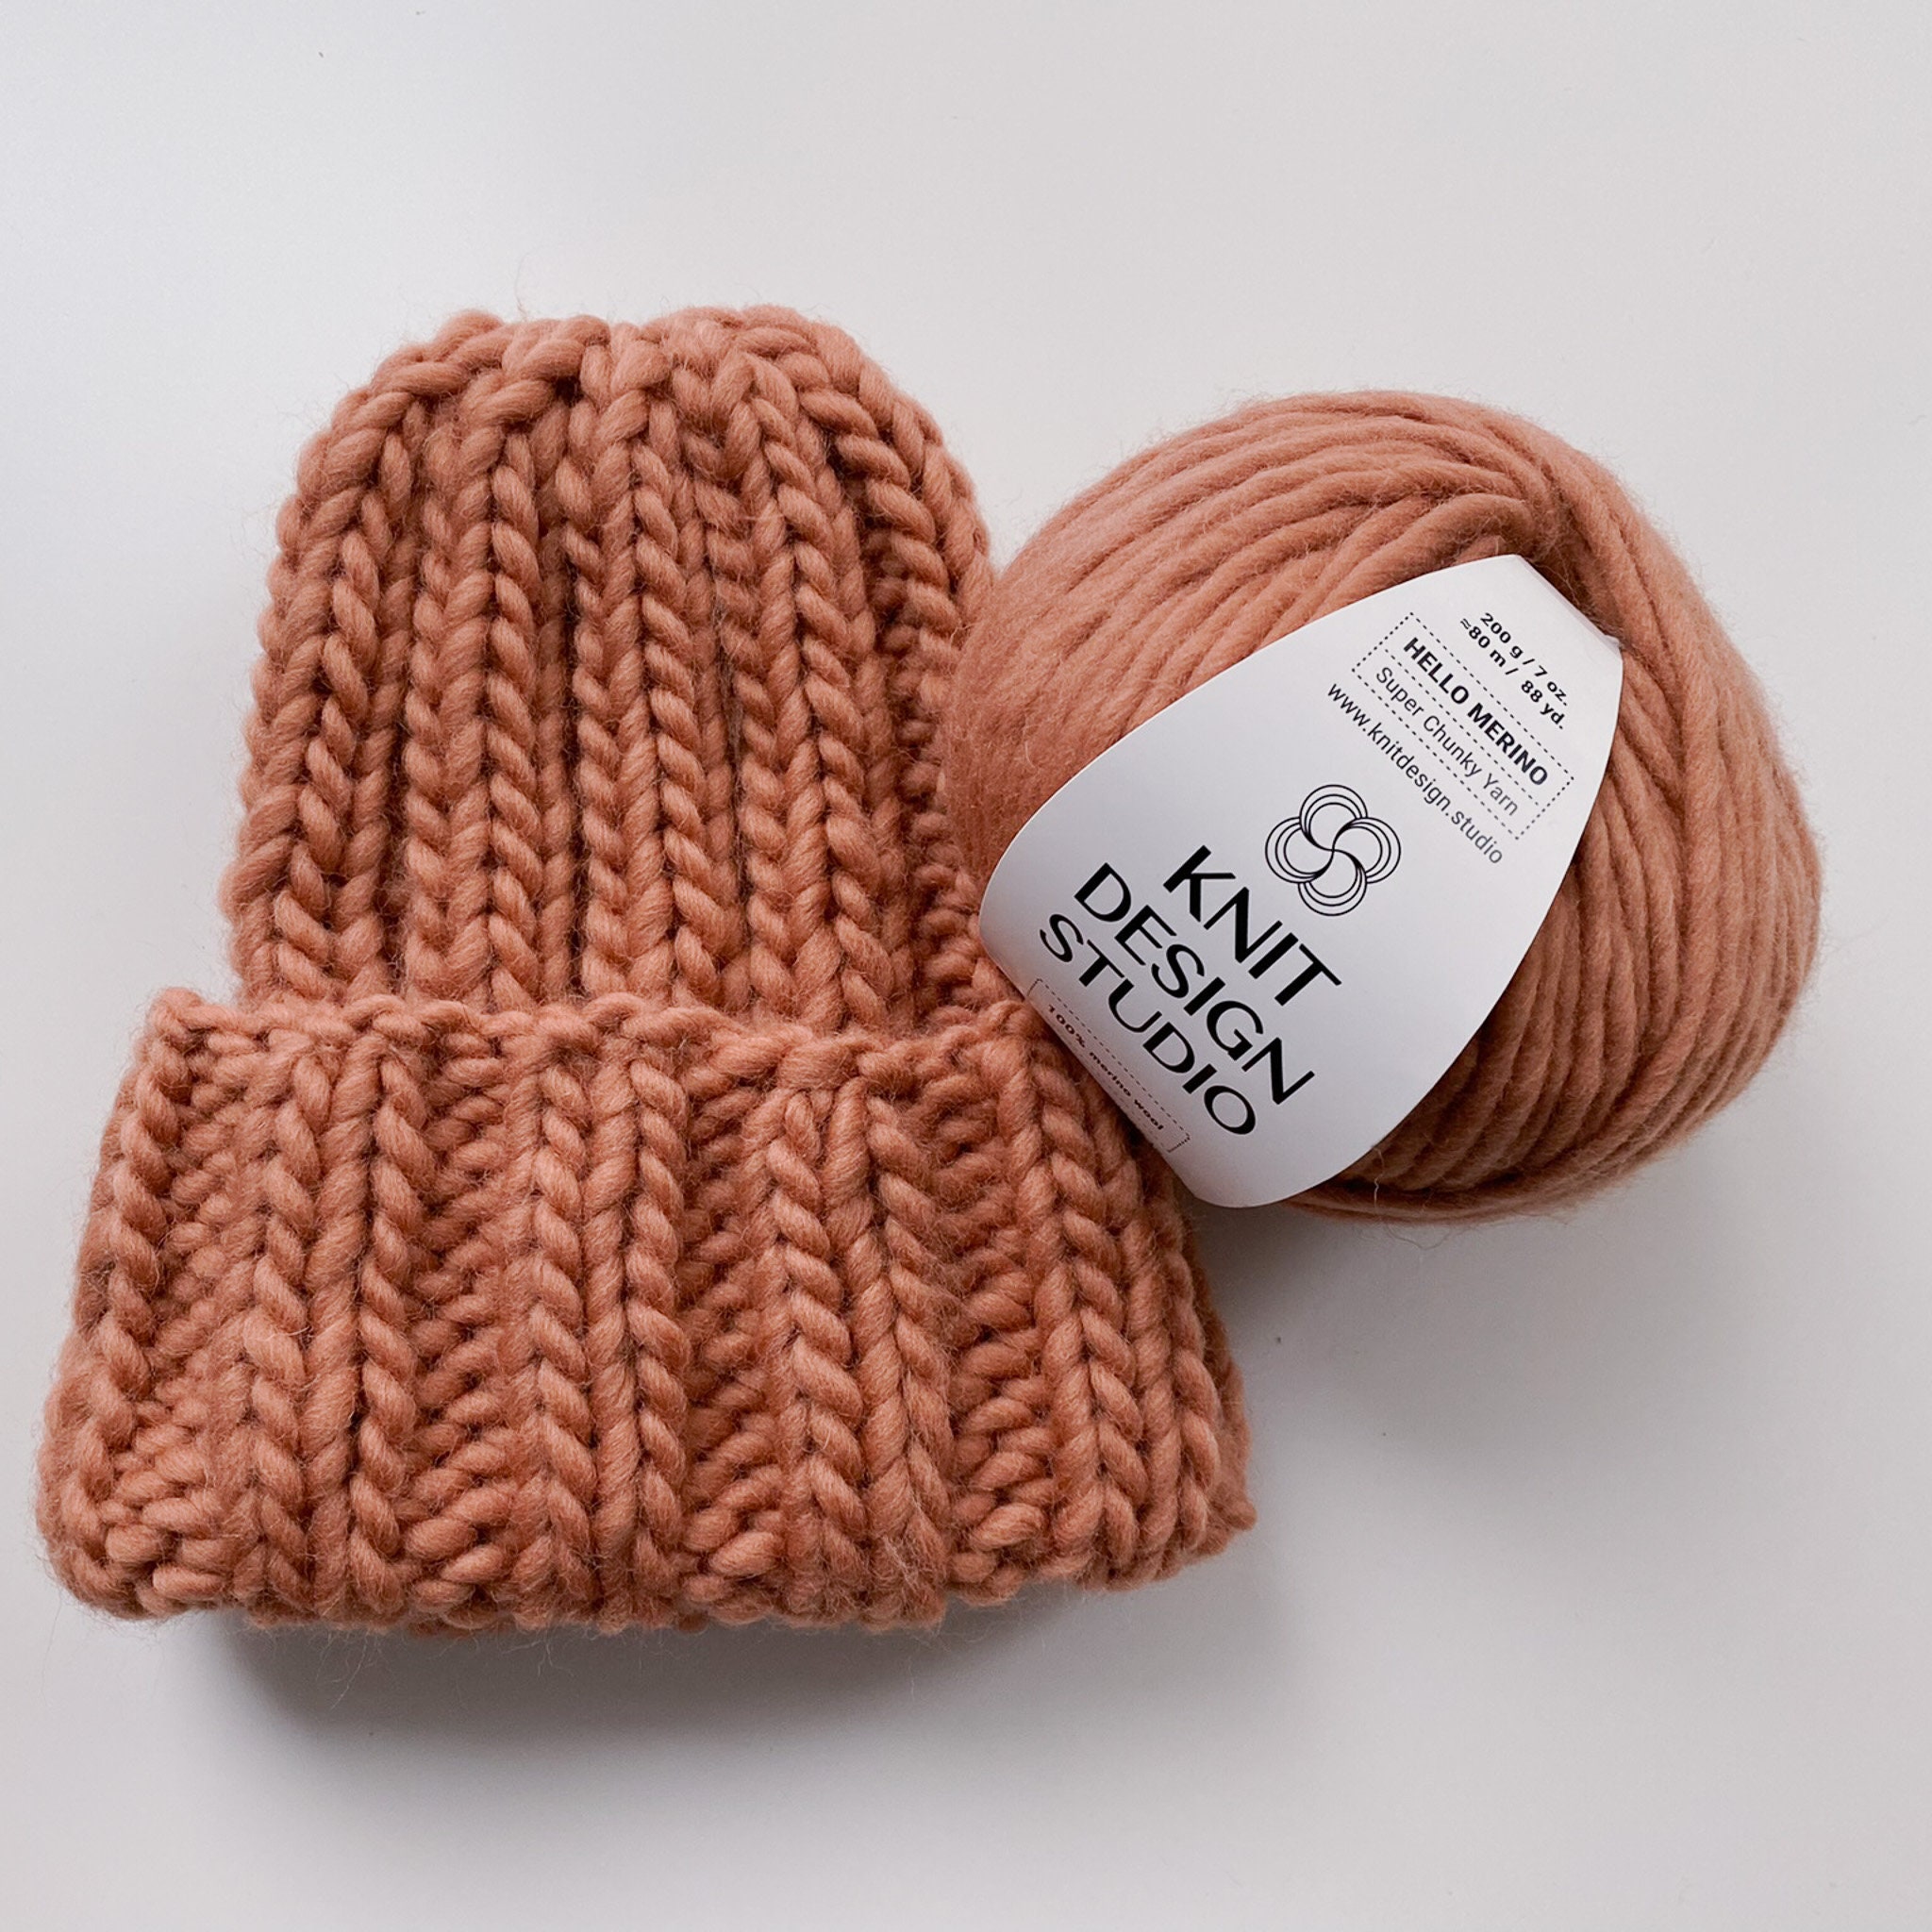 Super Chunky Bulky Merino Wool | Best Yarn for Learning How to Knit